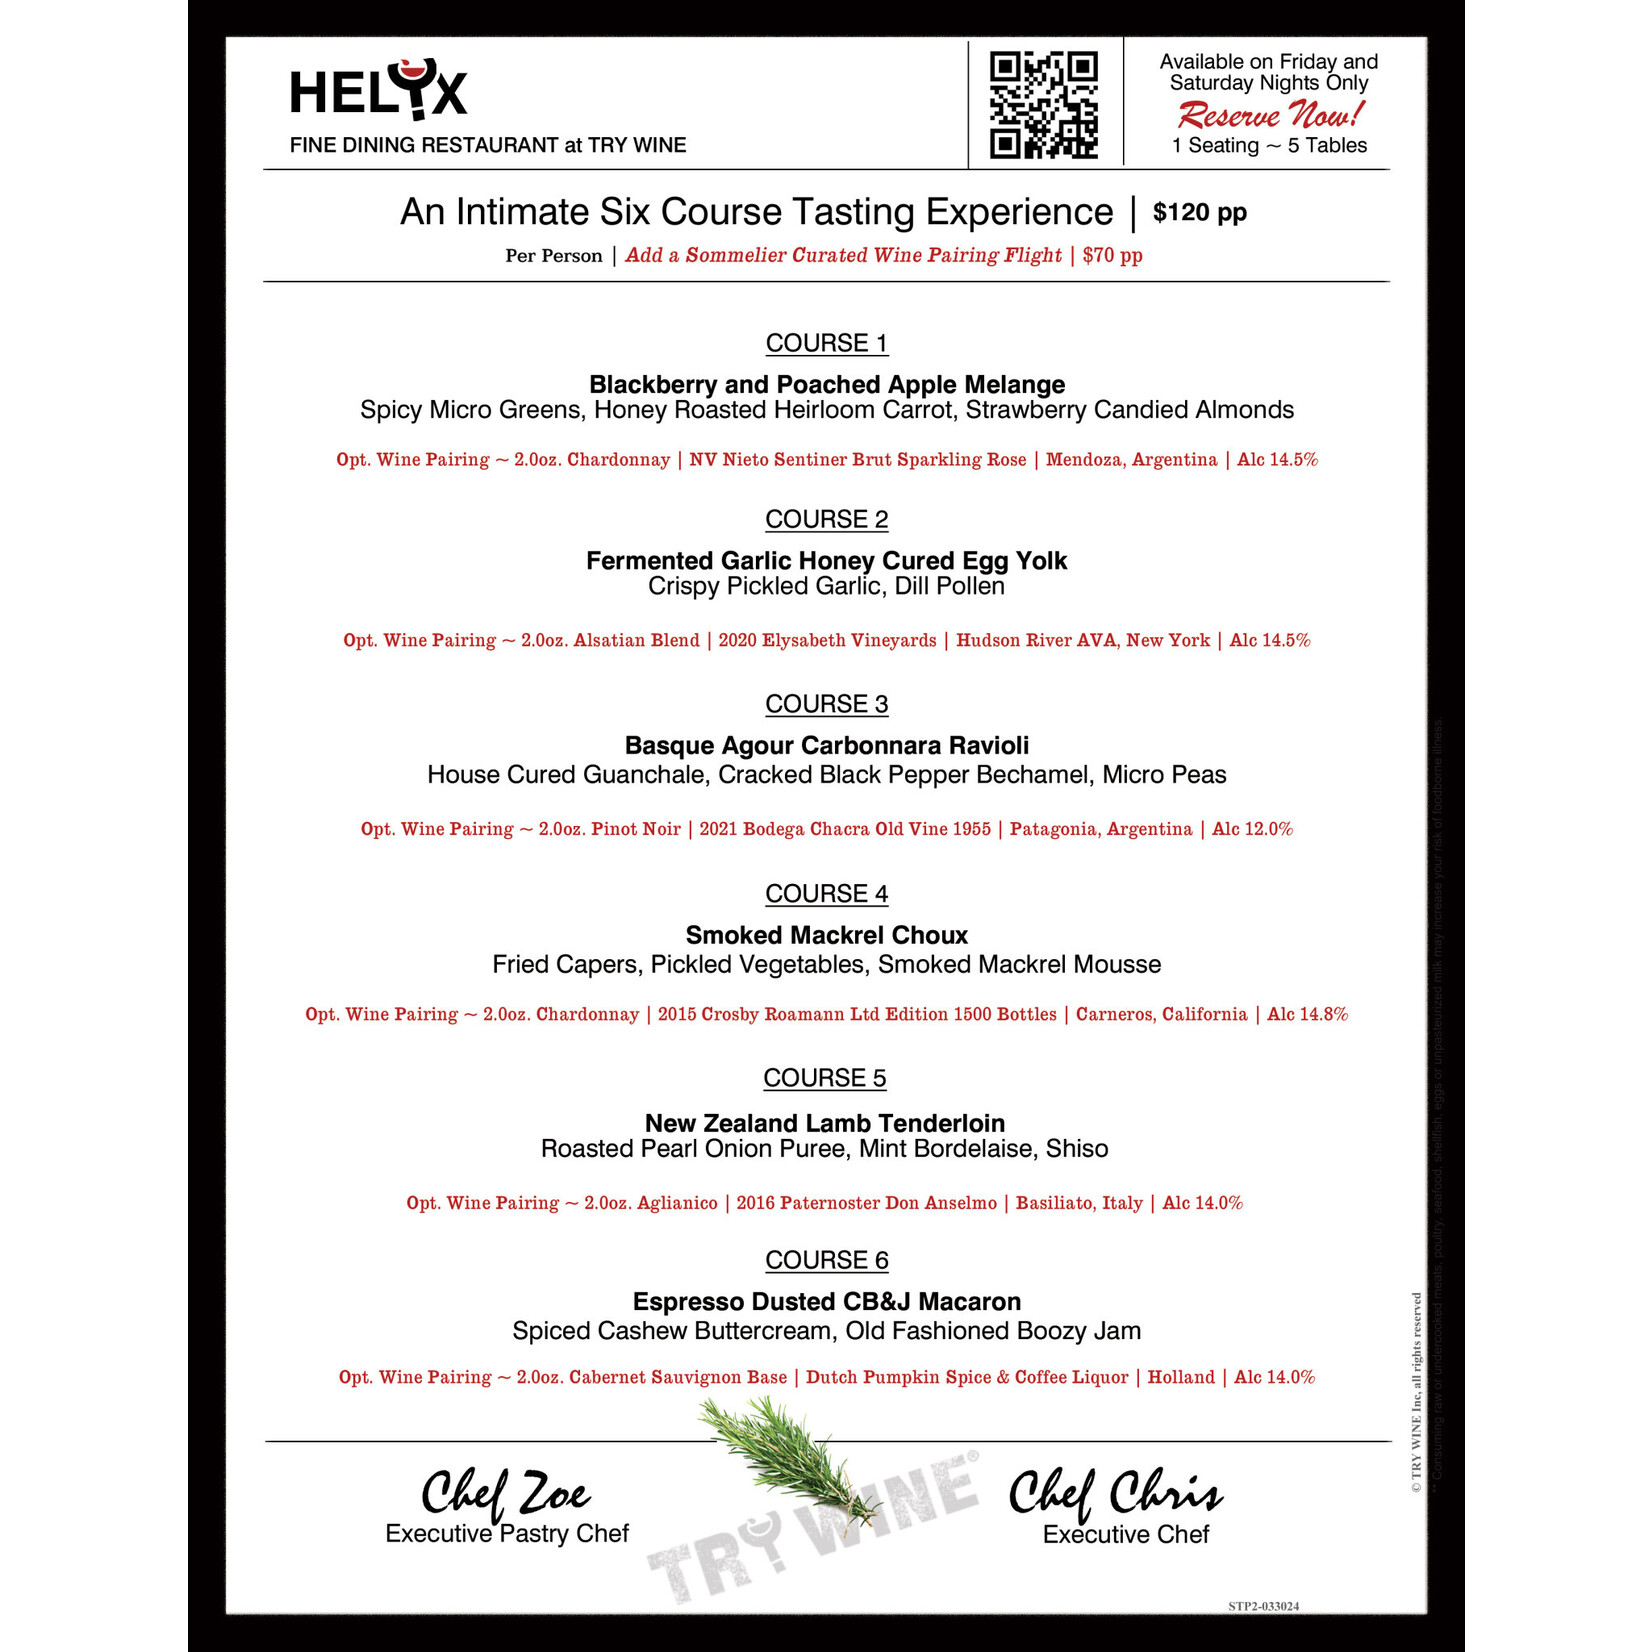 NEW - HELYX Restaurant 6 Course Tasting Experience ~ Saturday May 18th at 7:30pm ~ per person